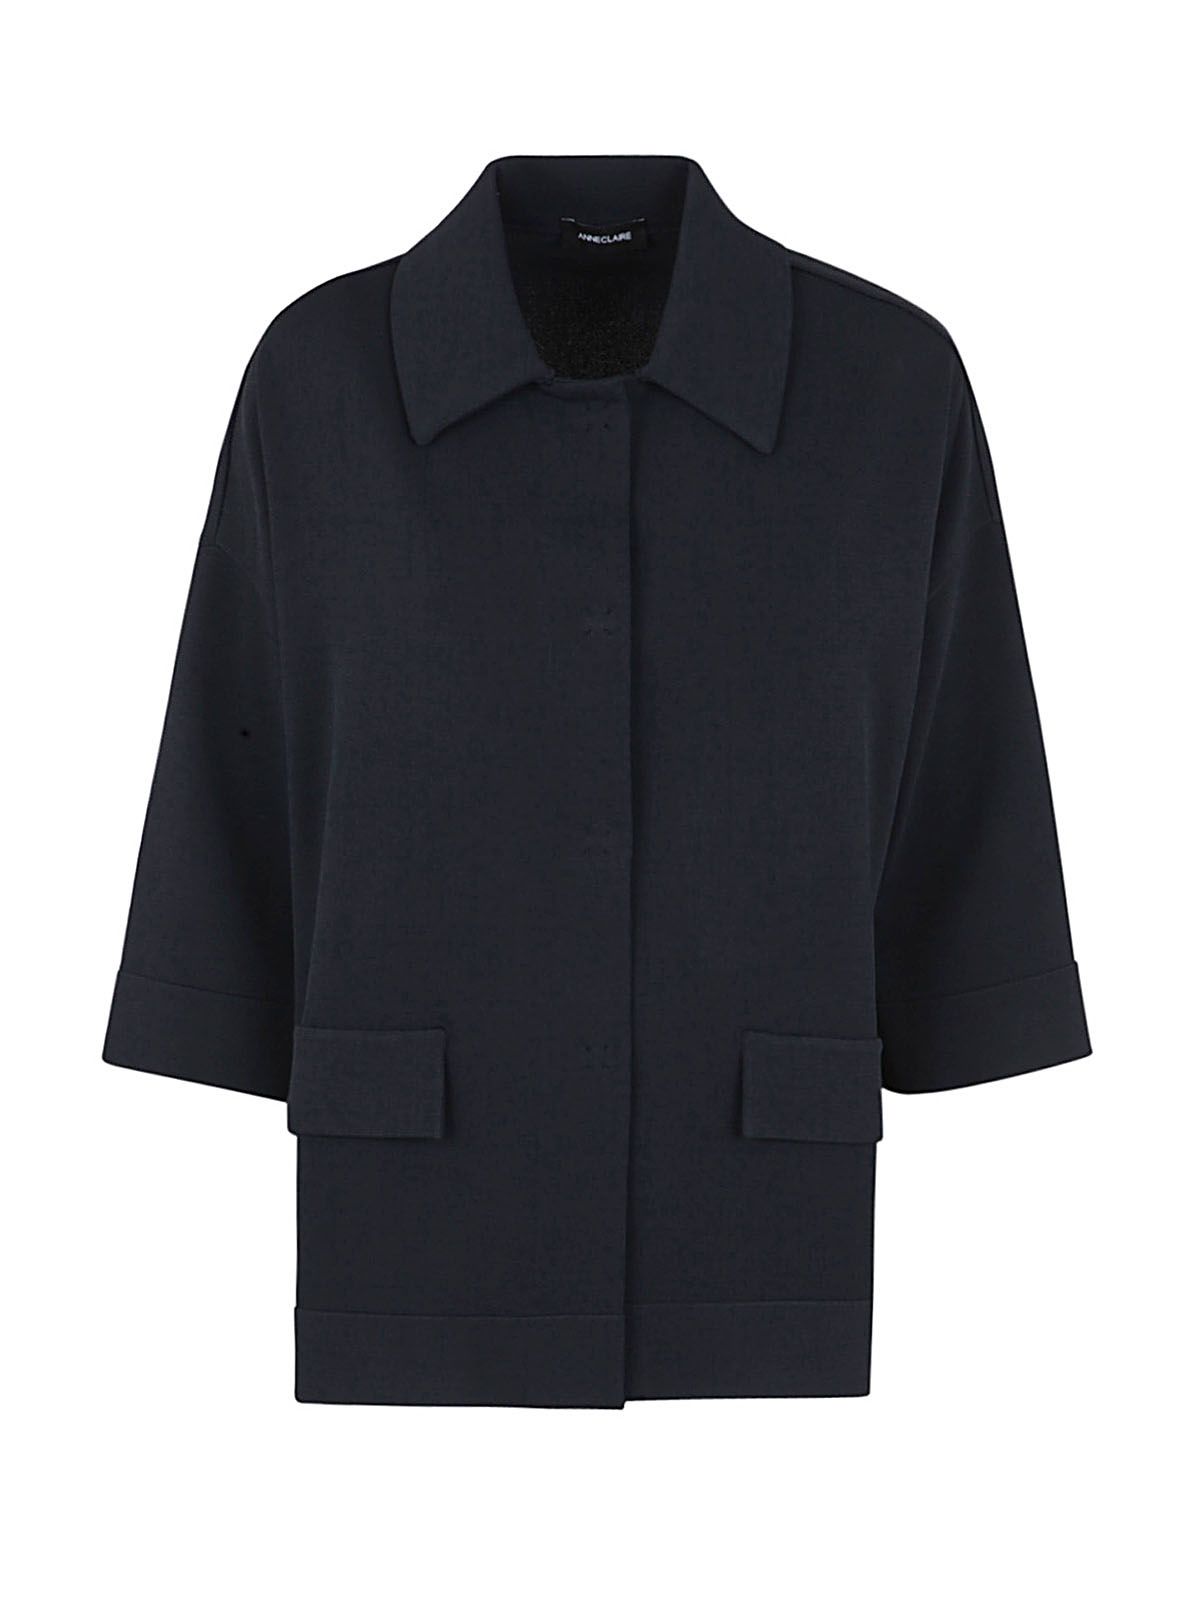 Anneclaire 3/4 Sleeves A Line Jacket In Navy Blue